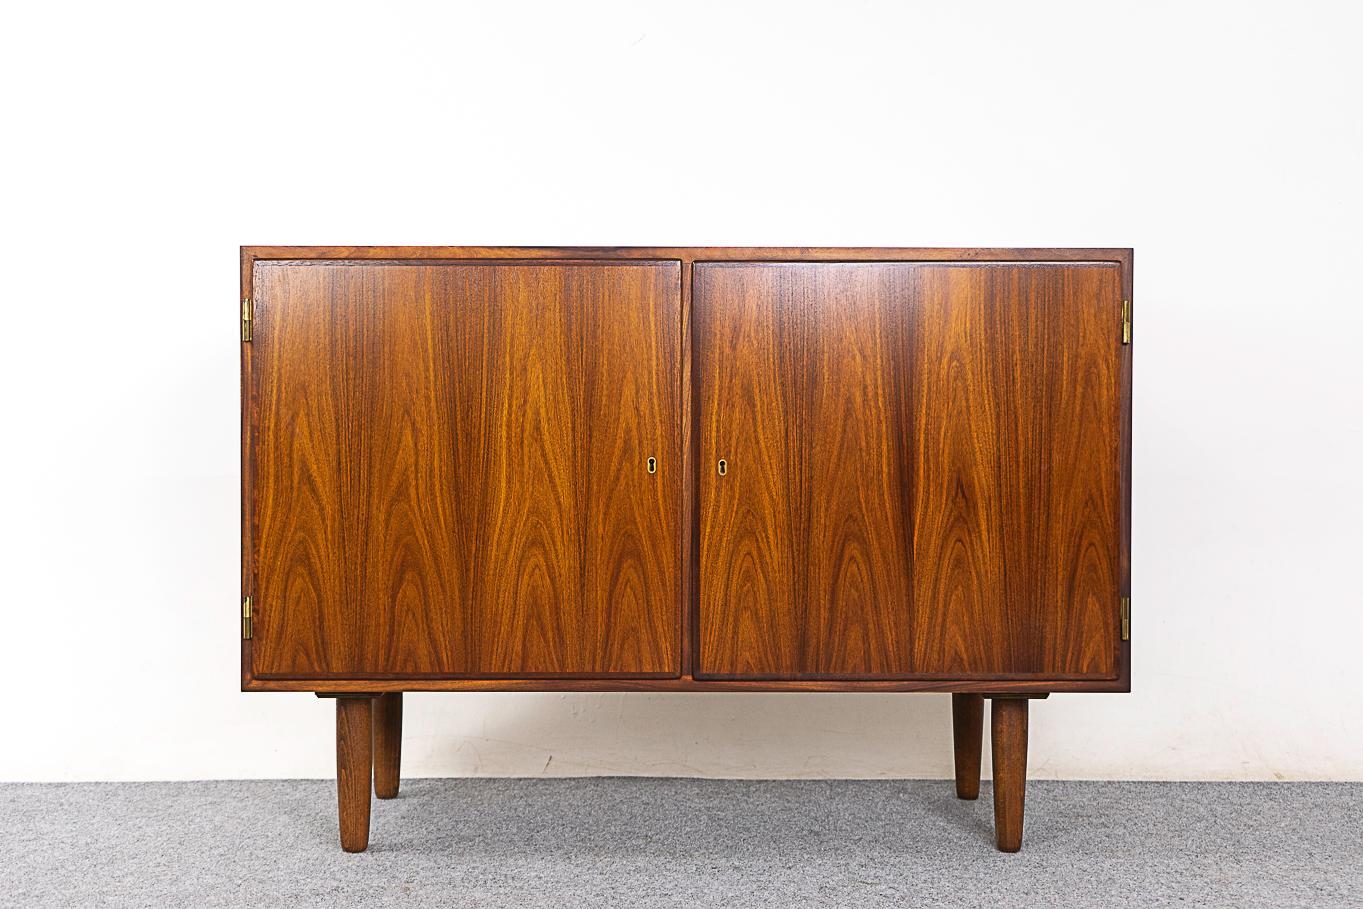 Rosewood mid-century cabinet by Hundevad, circa 1960's. Clean, simple lined design with exceptional book-matched veneer. Locking double doors, 2 adjustable shelves, 3 sleek drawers and tapered legs. Compact size!